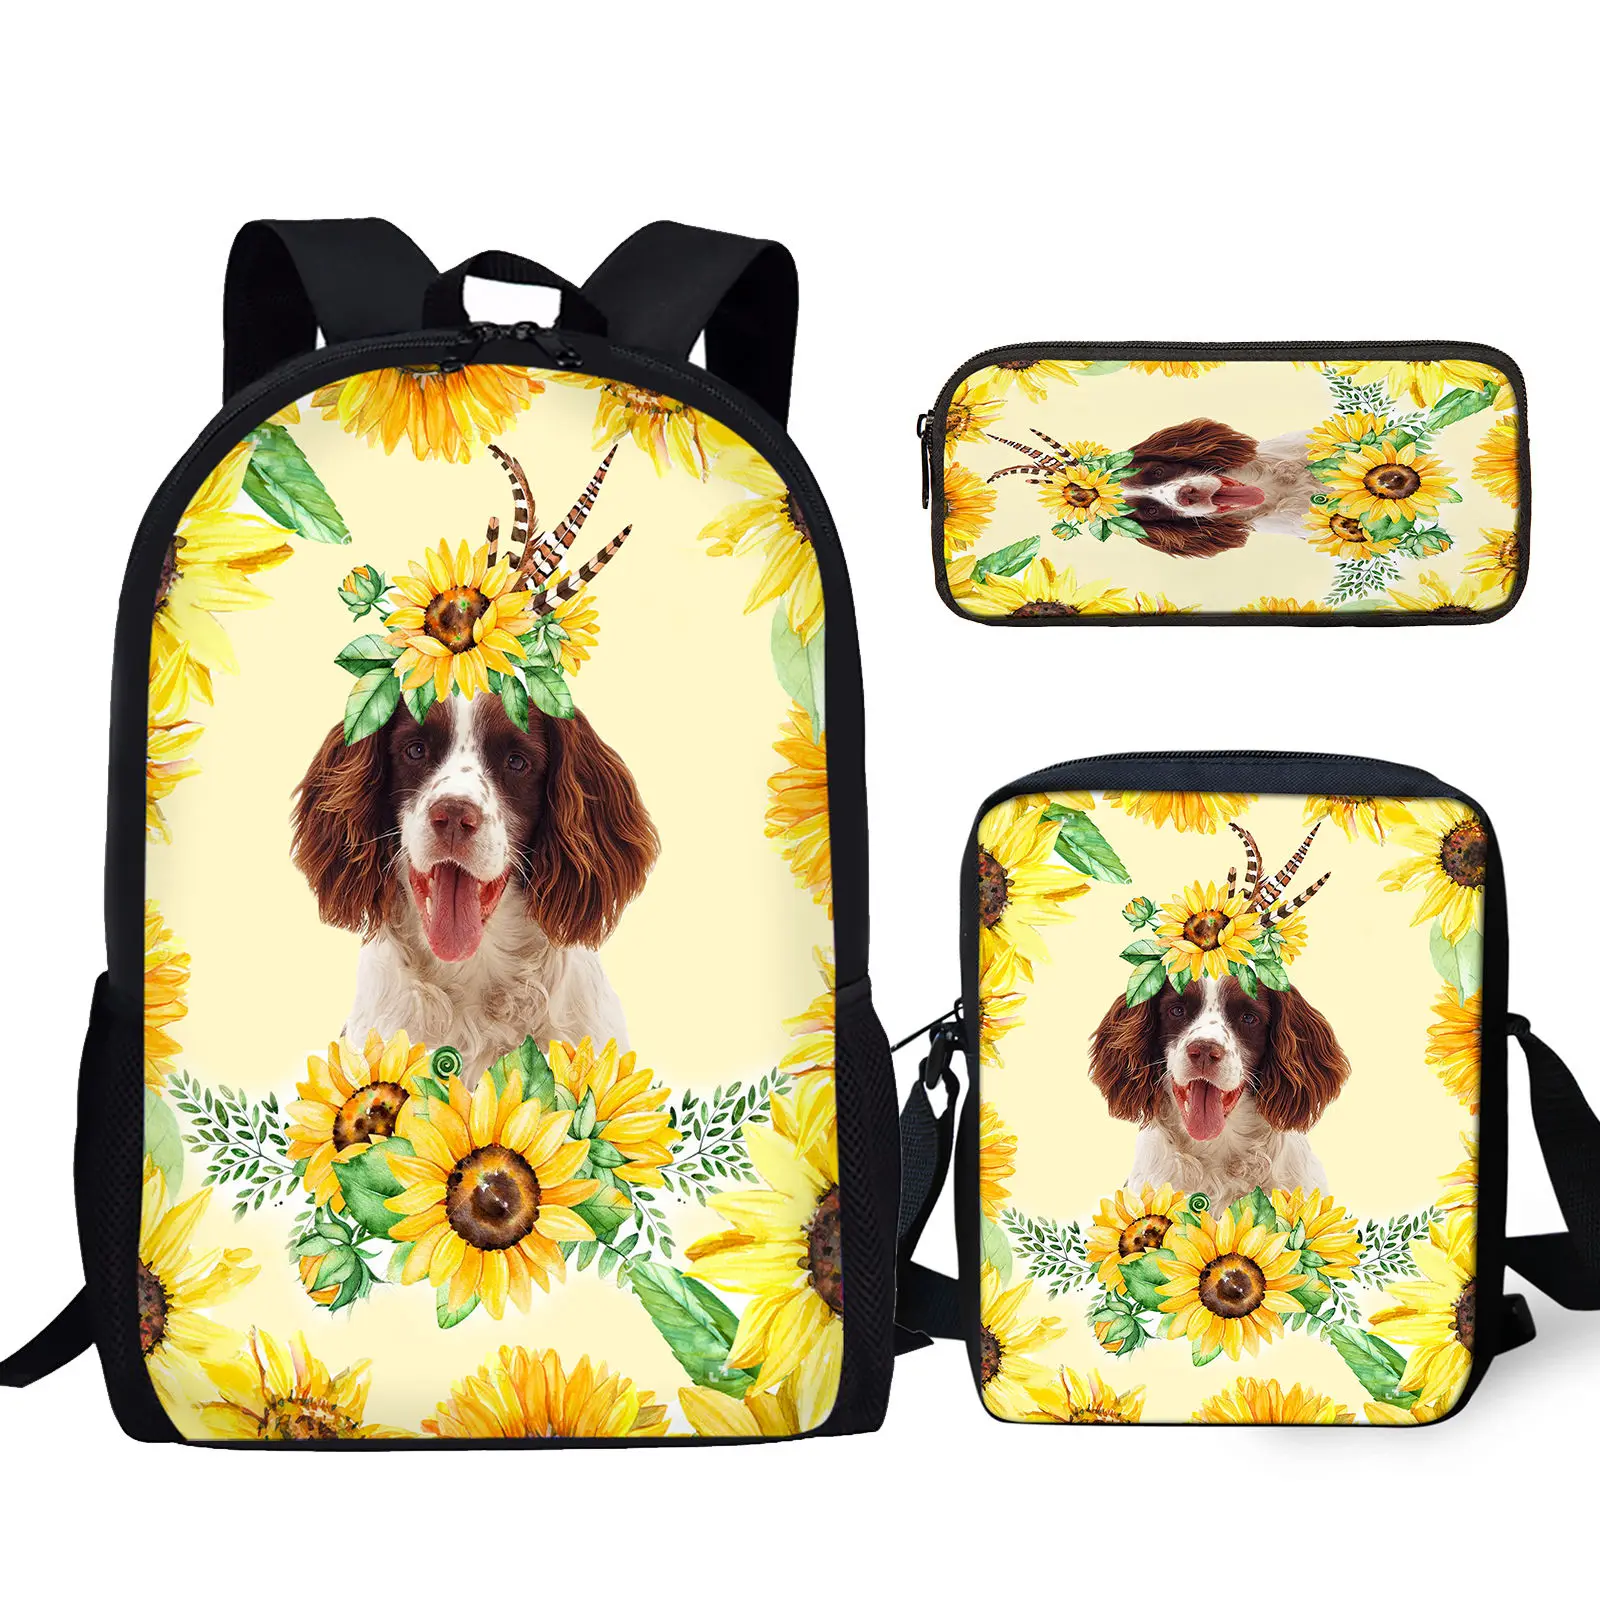 

YIKELUO British Springer Spaniel Sunflower Design Youth Notebook Textbook Backpack Tribal Feather Print Messenger Bag Mochilas